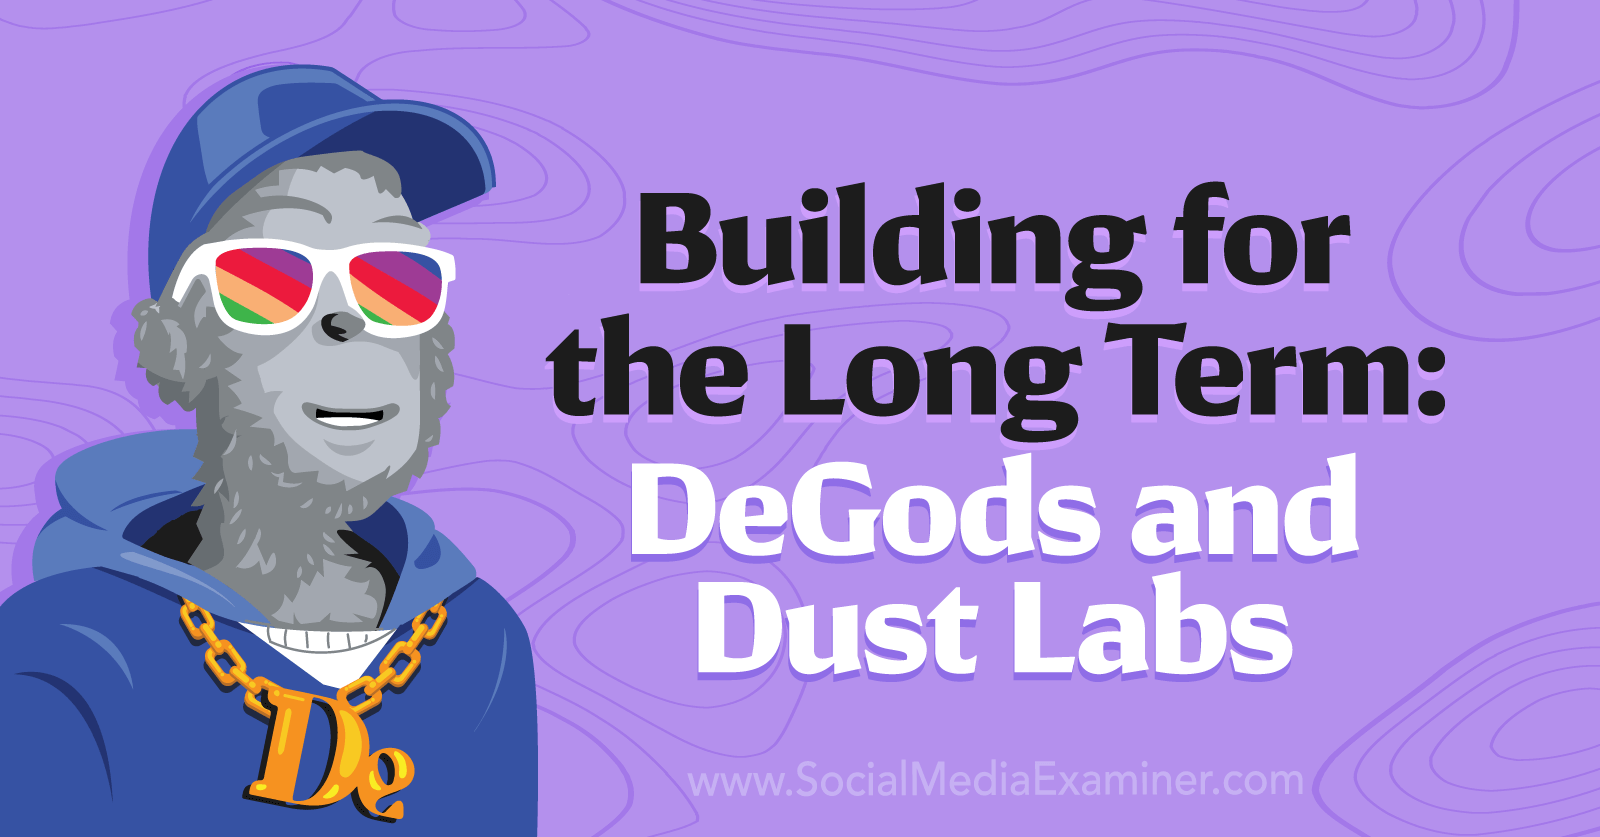 Building for the Long Term: DeGods and Dust Labs by Social Media Examiner